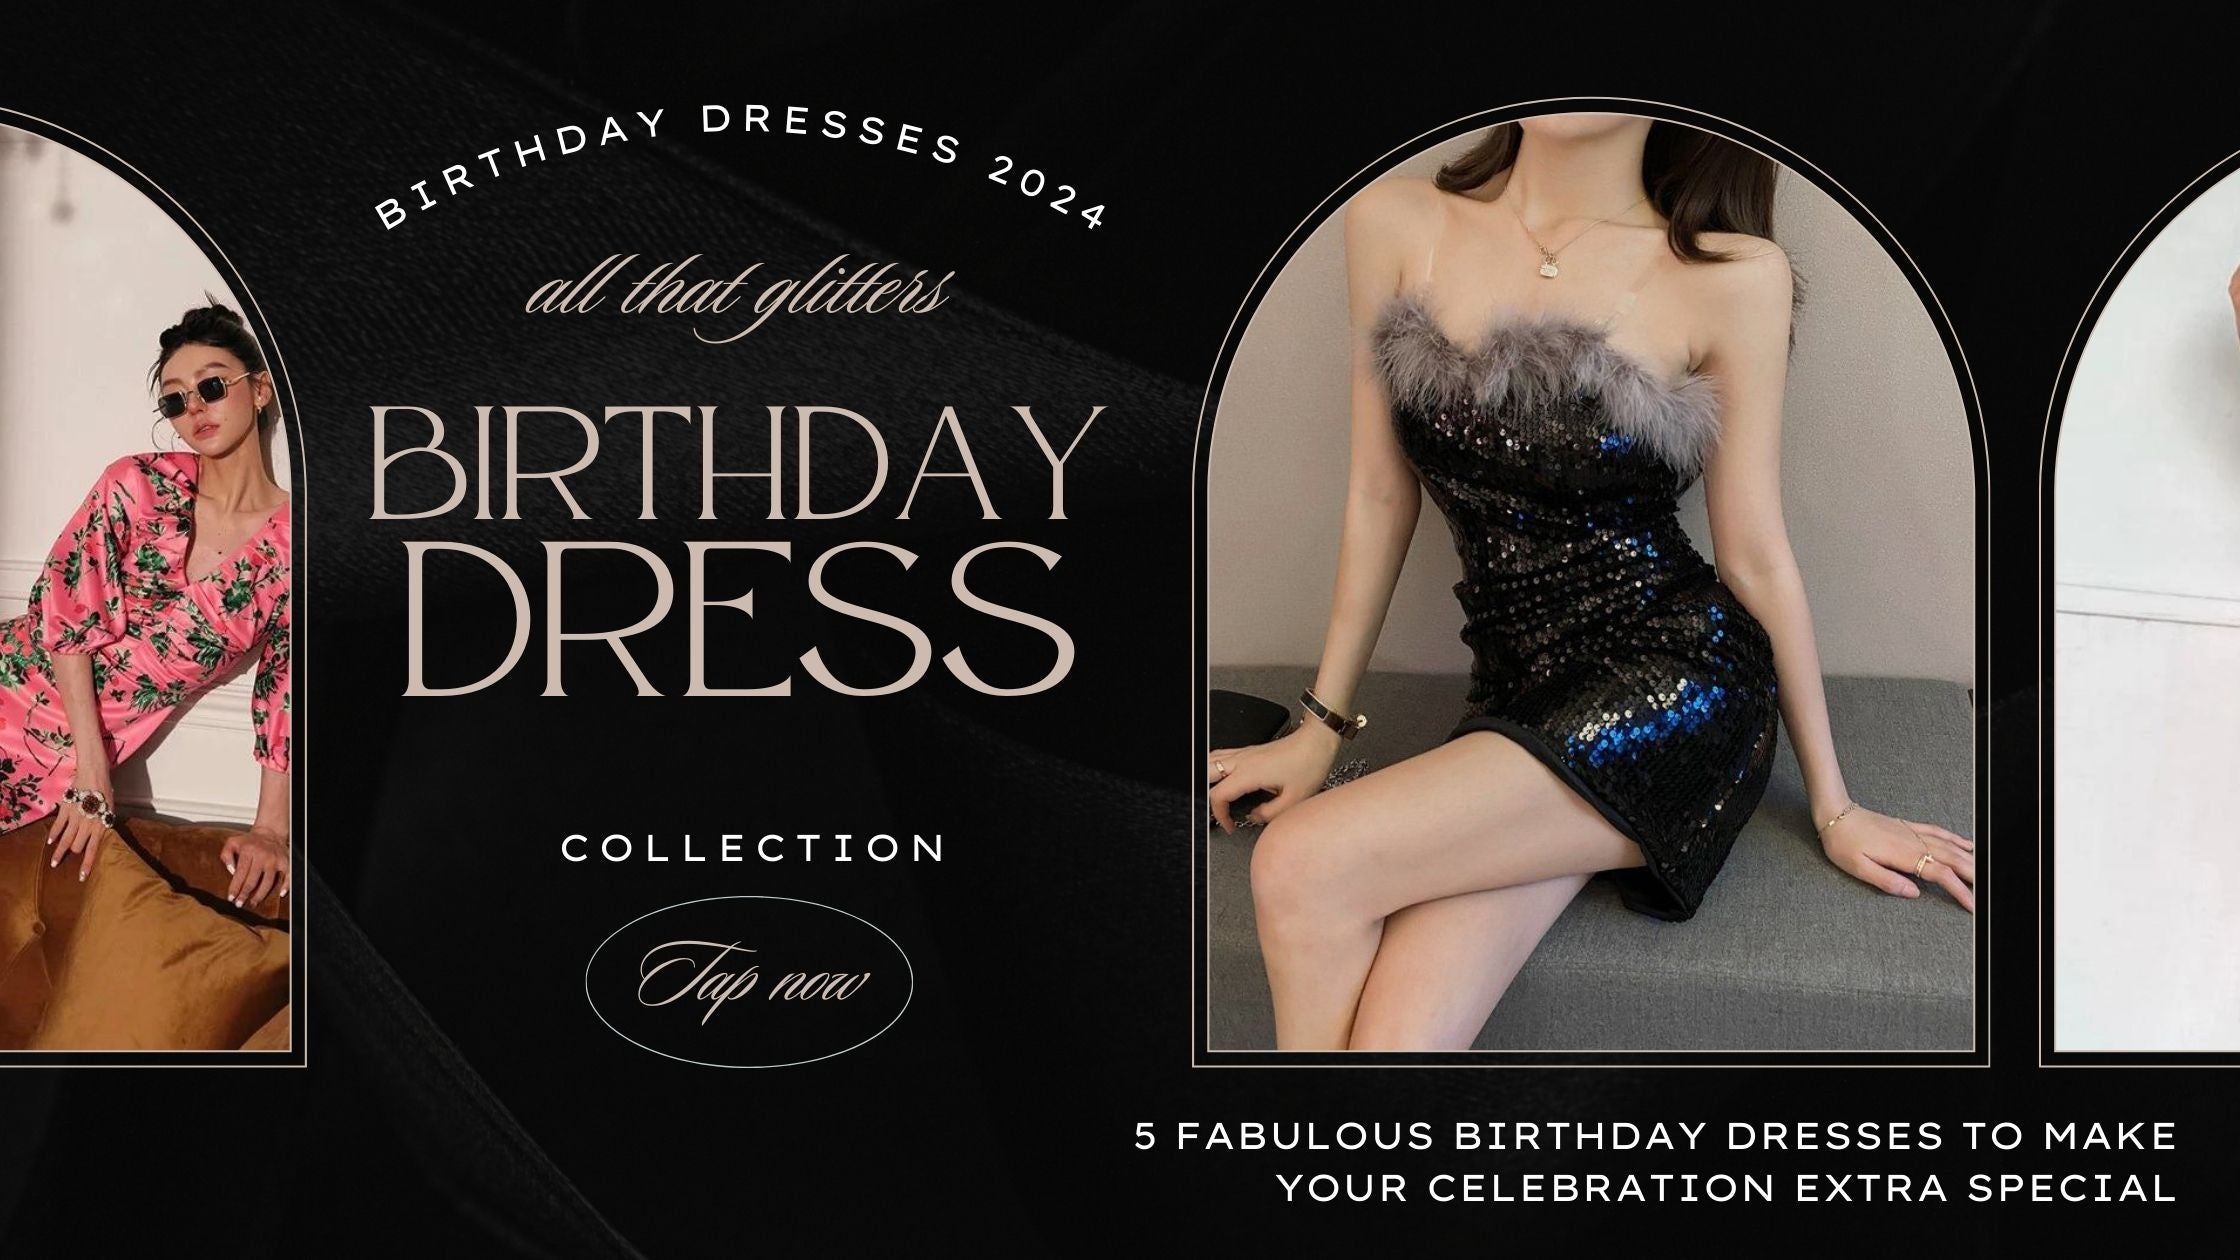 5 Fabulous Birthday Dresses to Make Your Celebration Extra Special